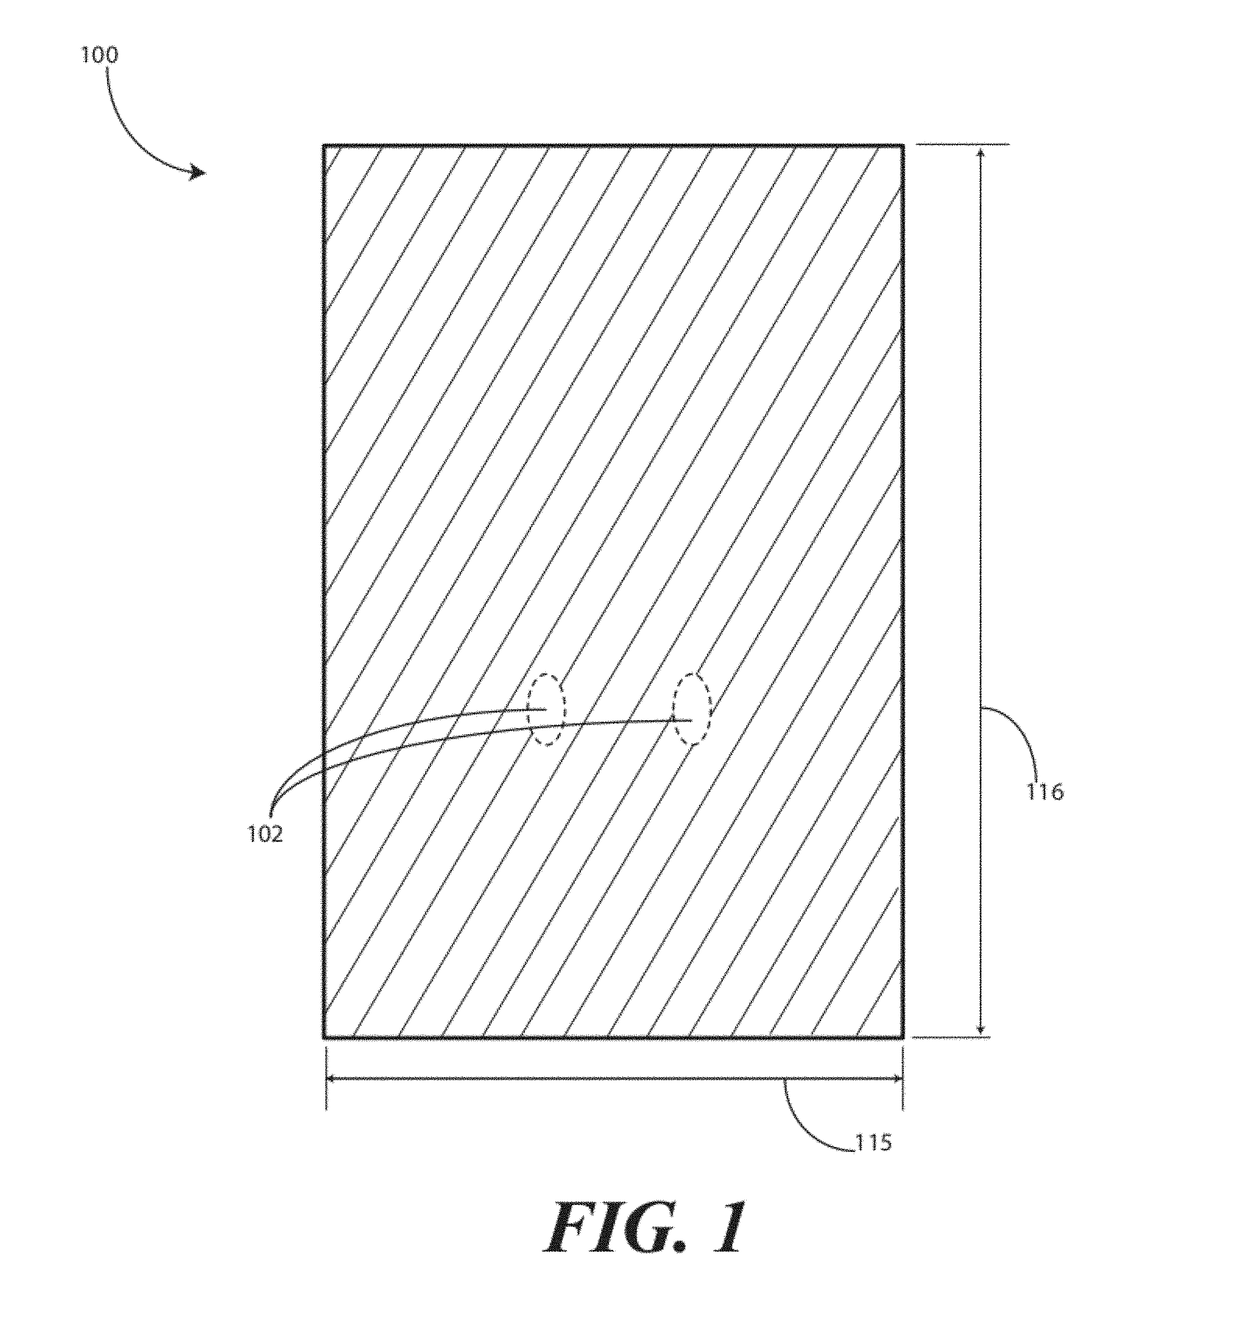 Surgical drape configured for peripherally inserted central catheter procedures